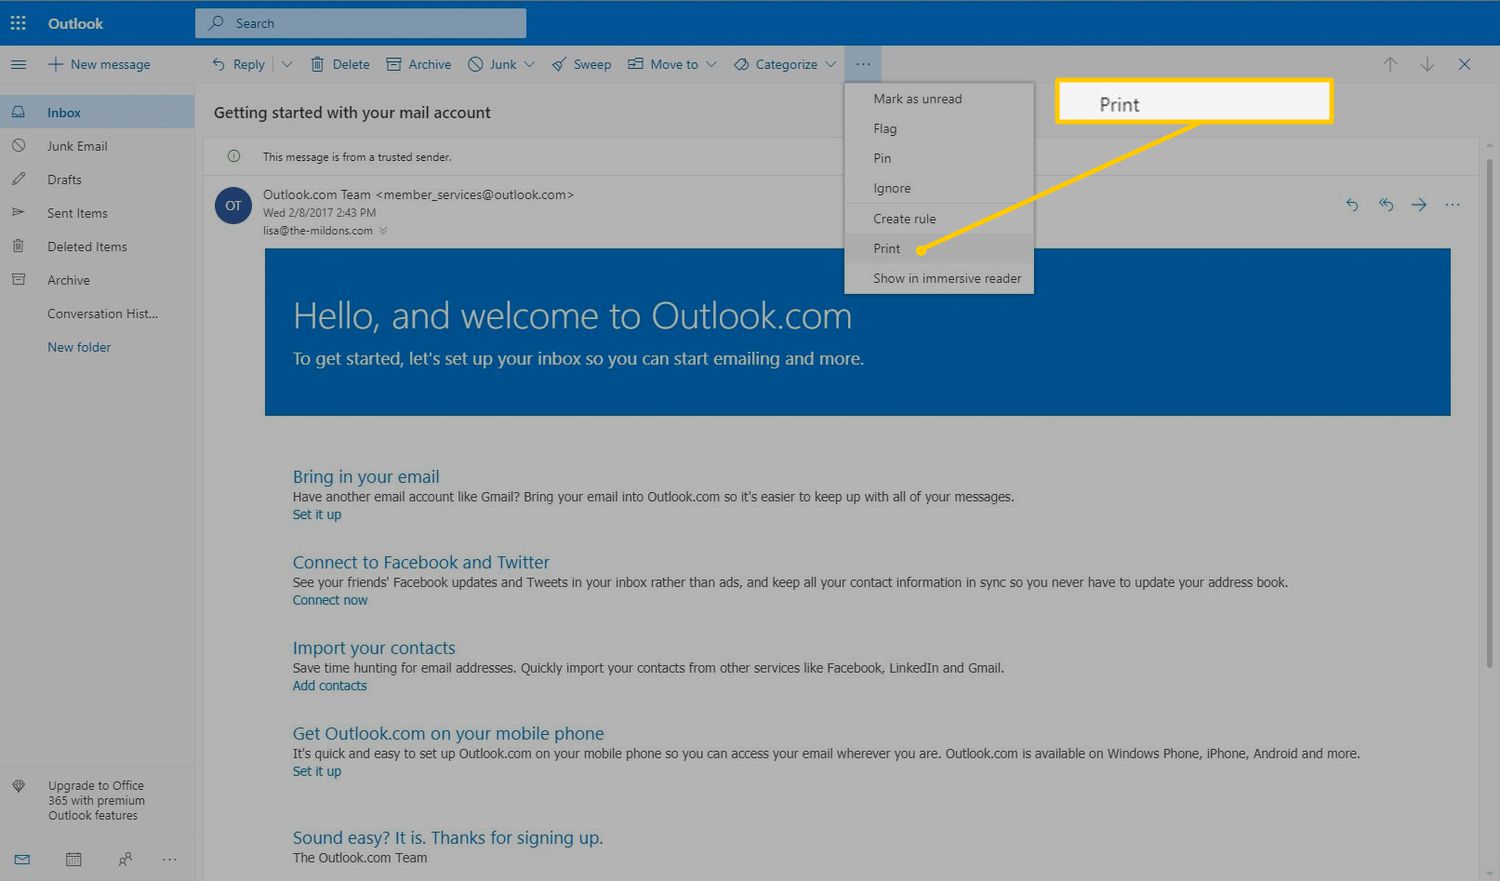 How to print email in outlook?